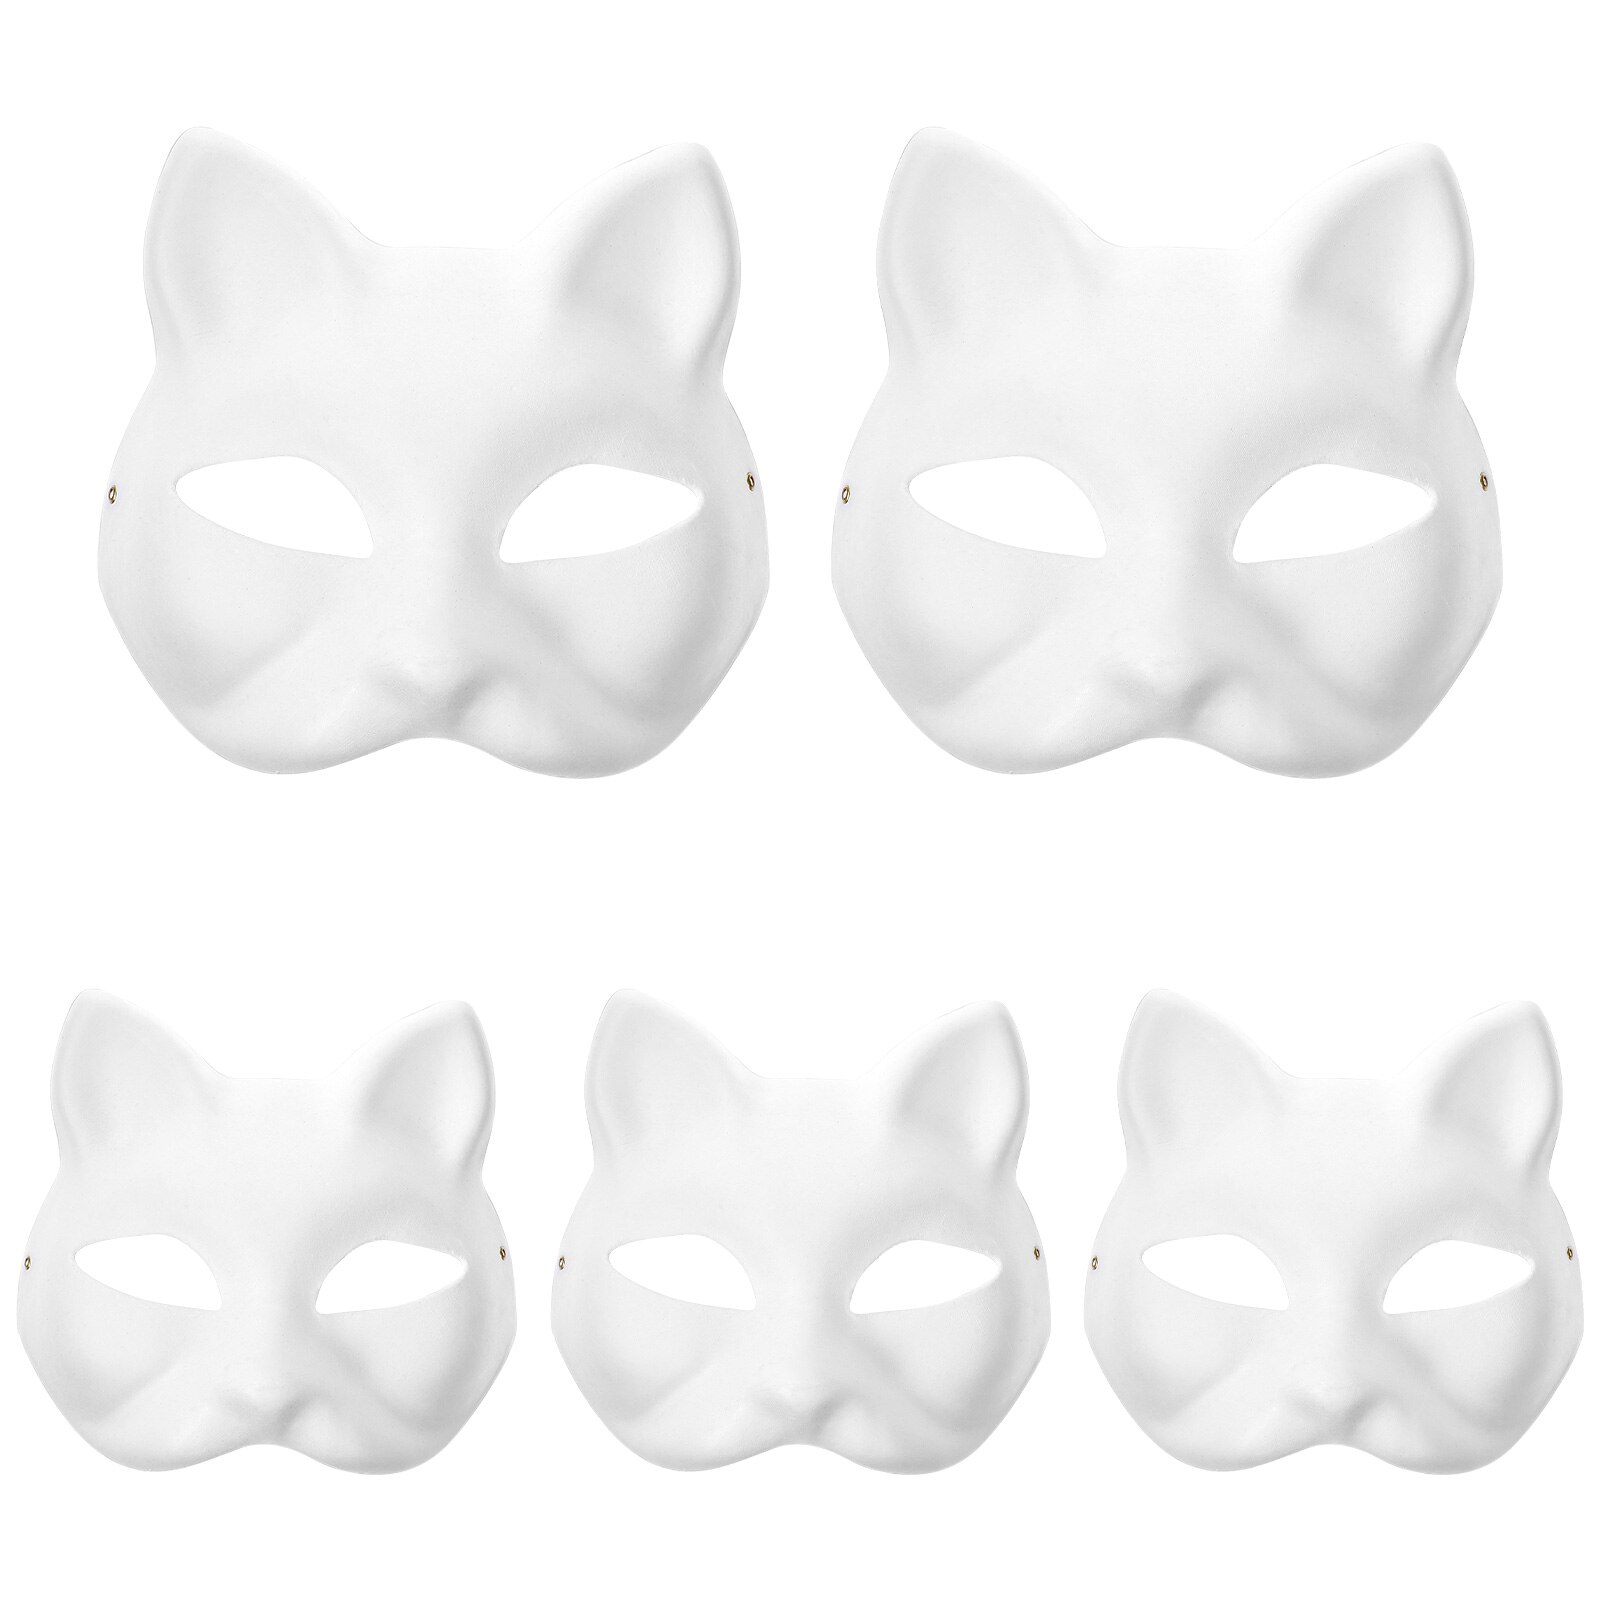 EXCEART 5pcs Halloween Decor Diy Unpainted Masks Cat Masks to Paint  Masquerade Props Paper Masks White Paper Cat Mask Cat Cosplay Paper Hand  Painted